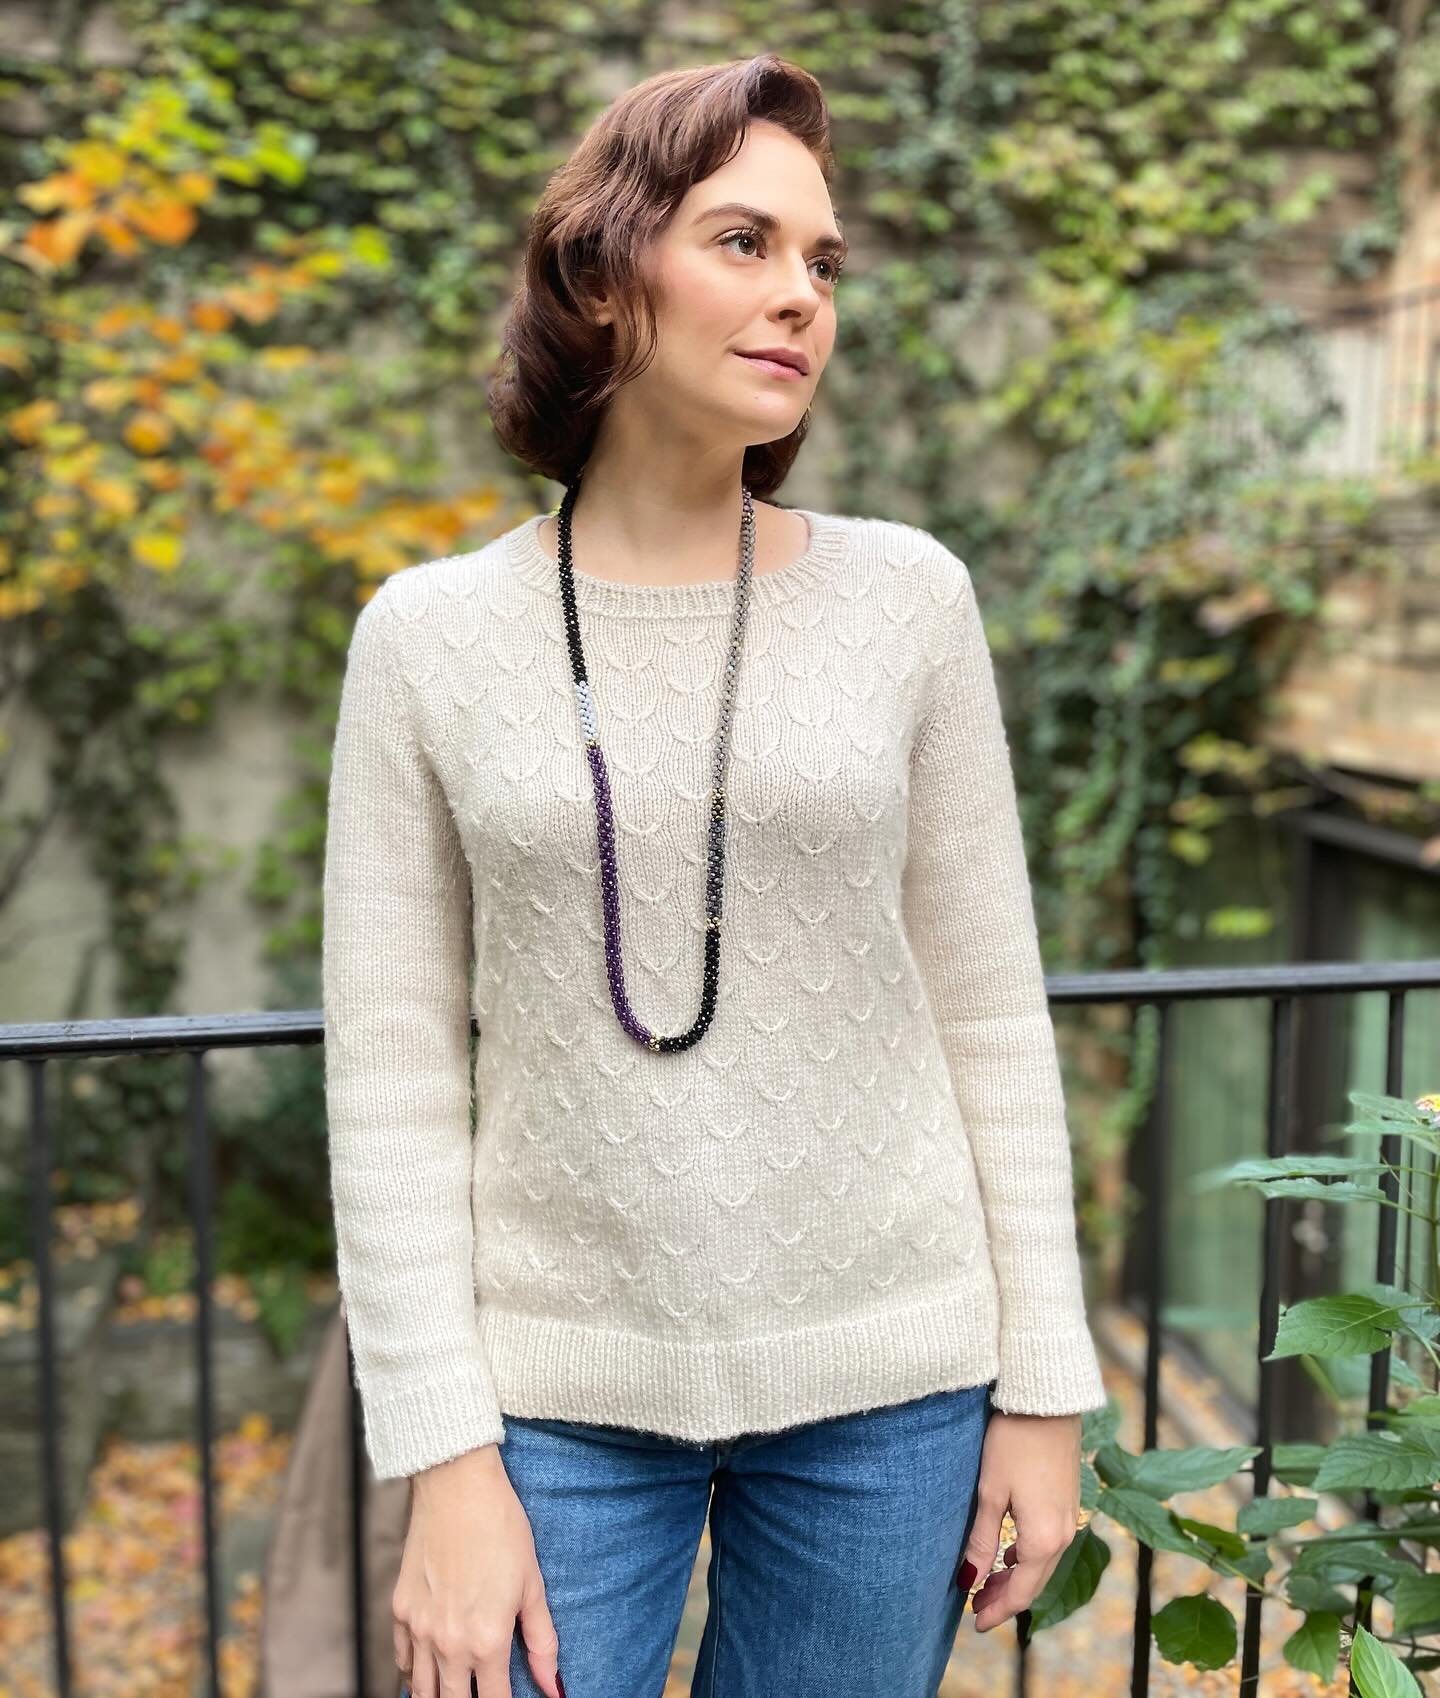 I am often asked why I prefer knitting my sweaters in pieces and seaming them. My preference is informed by a number of things. I enjoy the process of making pieces, as the weight on my needles is much less and I am much faster than when knitting wit